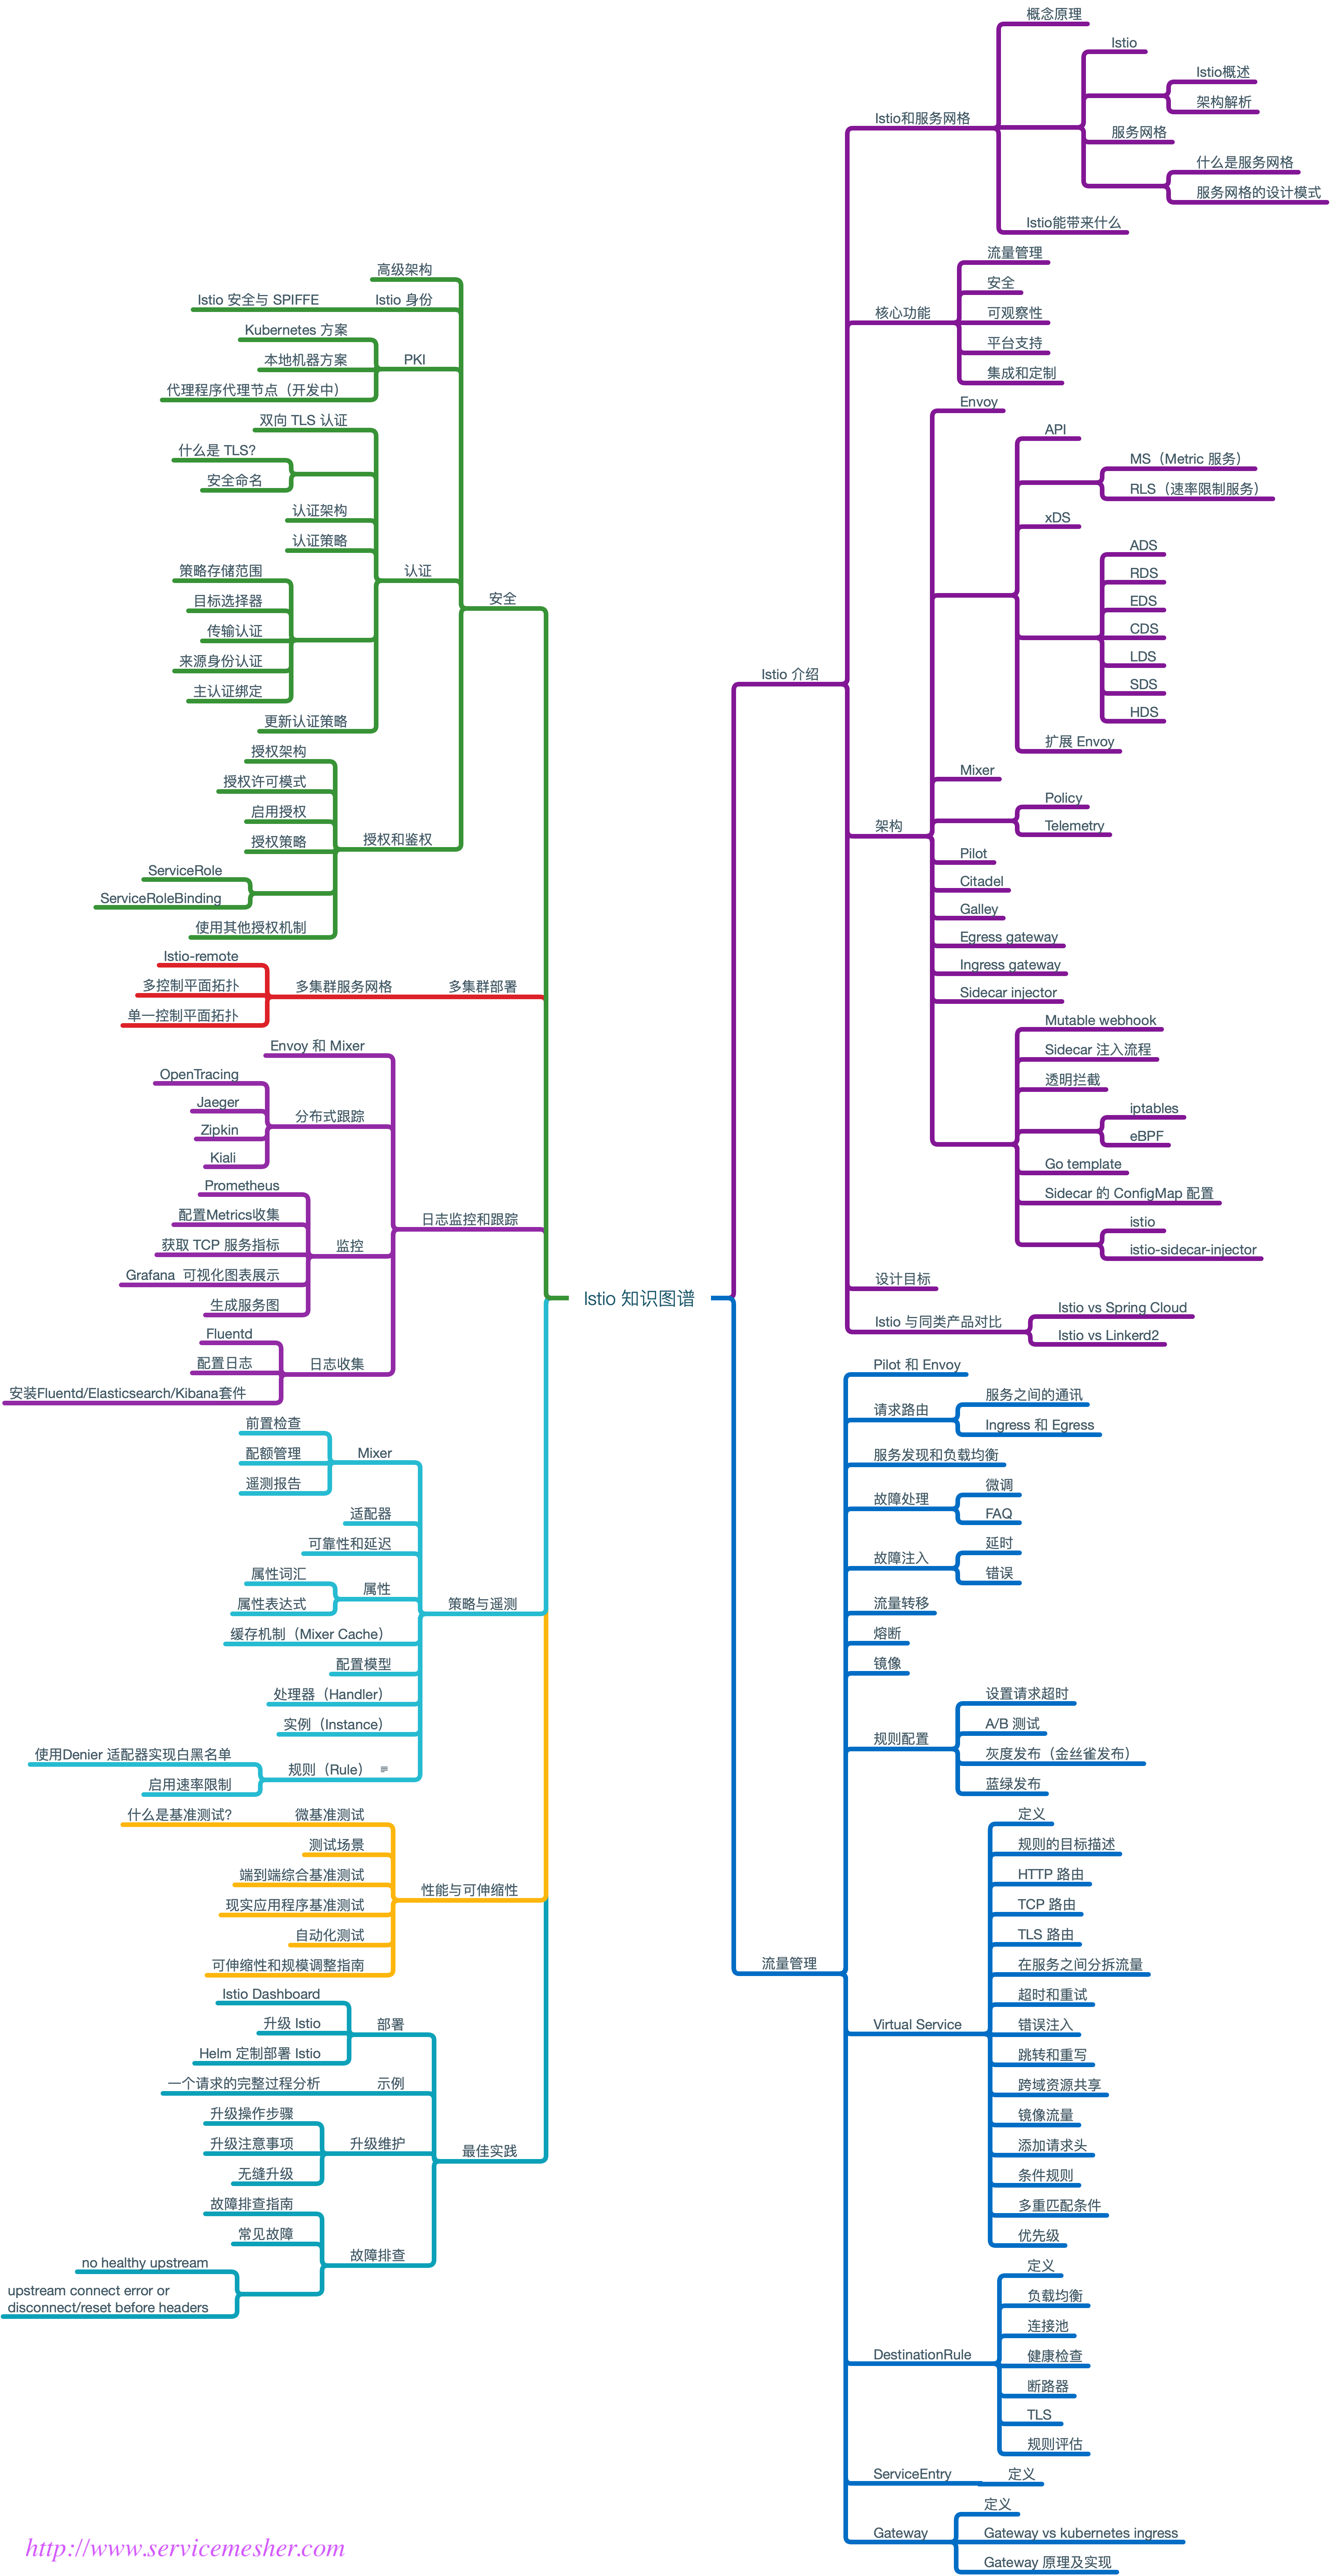 istio-knowledge-map.png